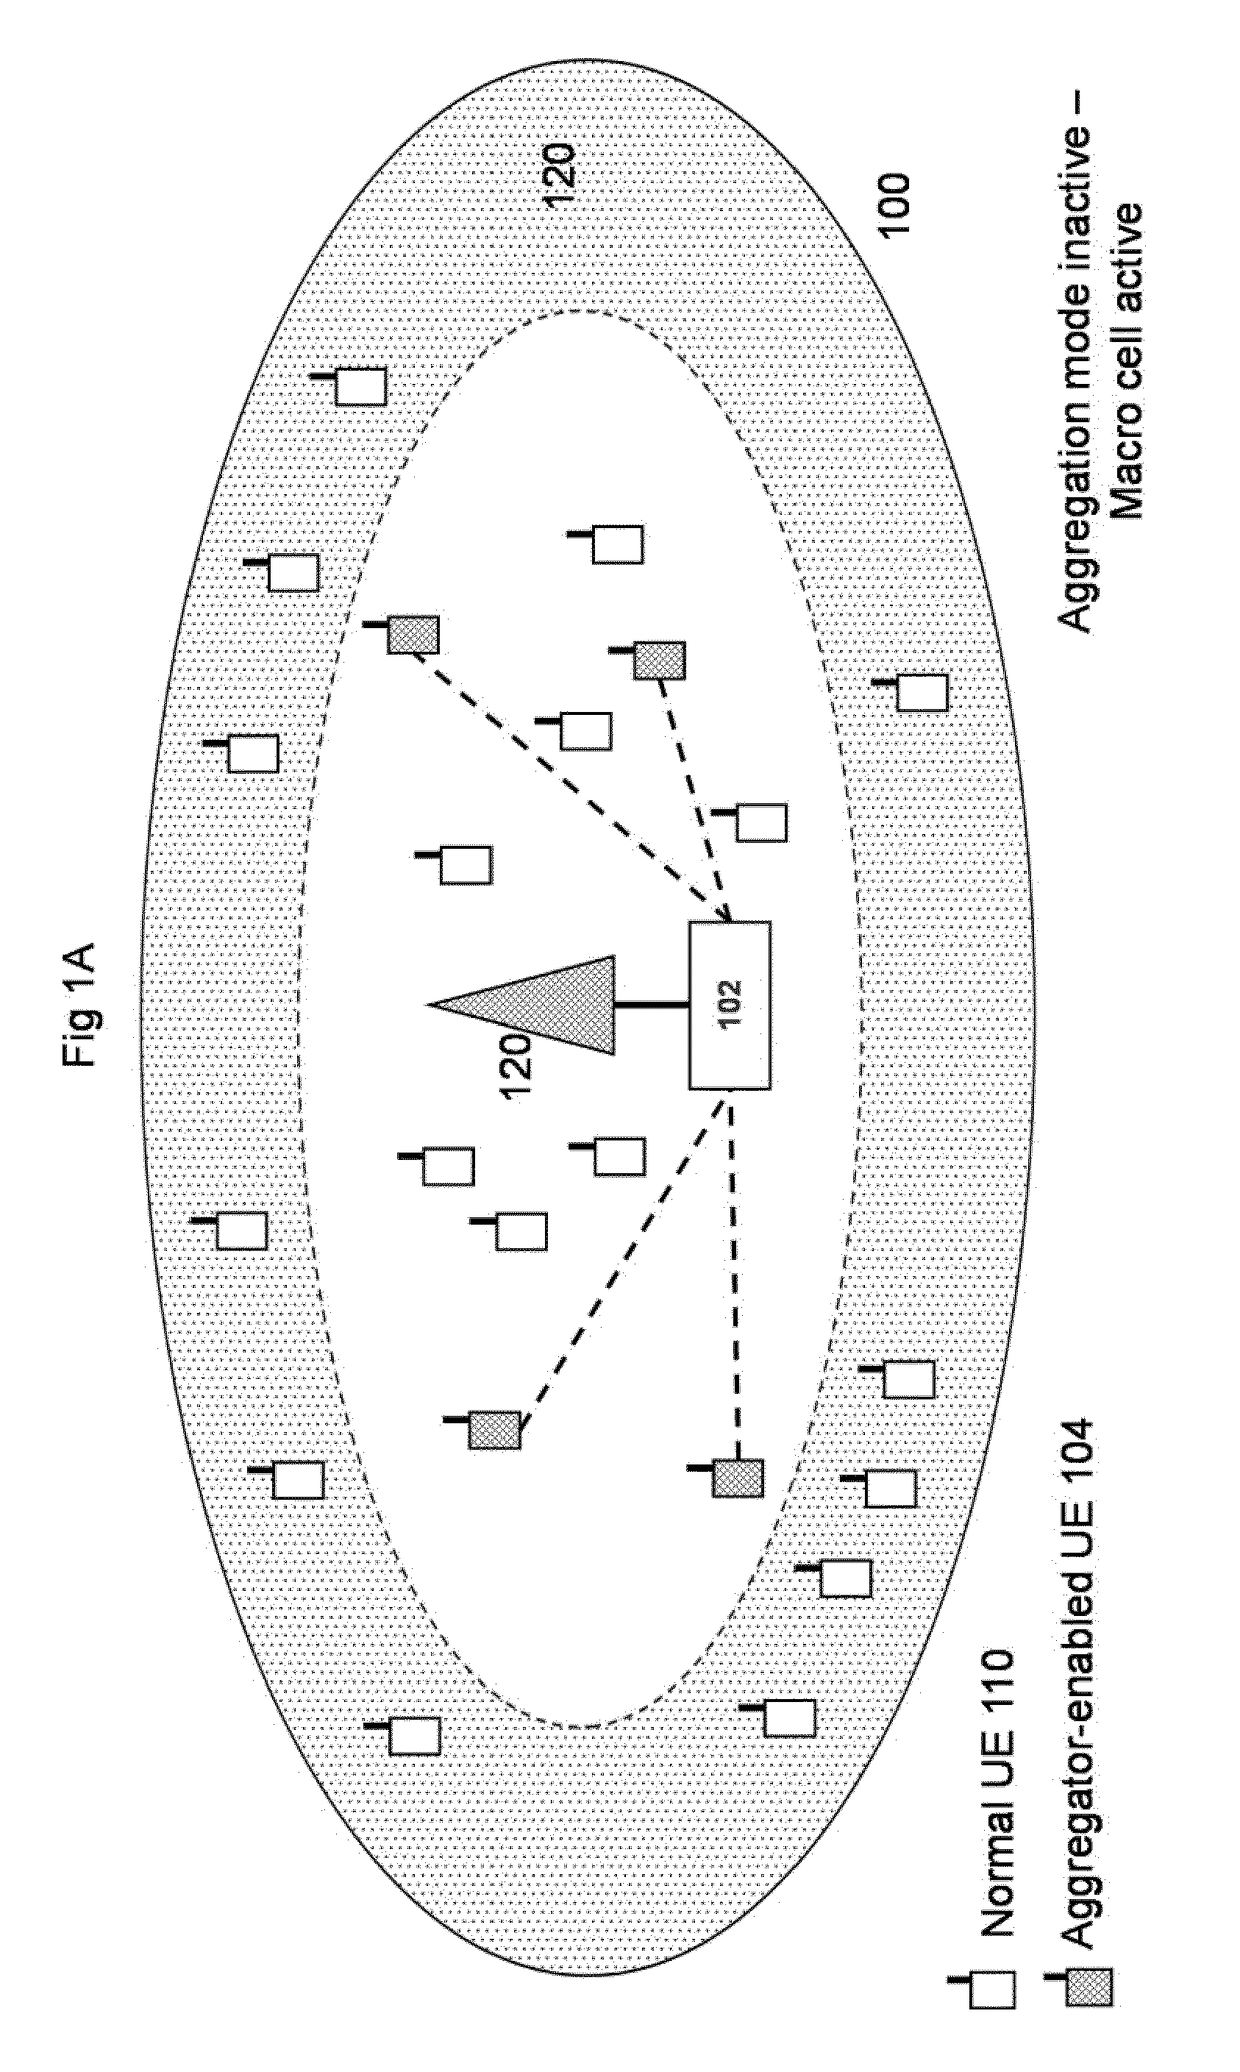 Radio resource management in a telecommunication system